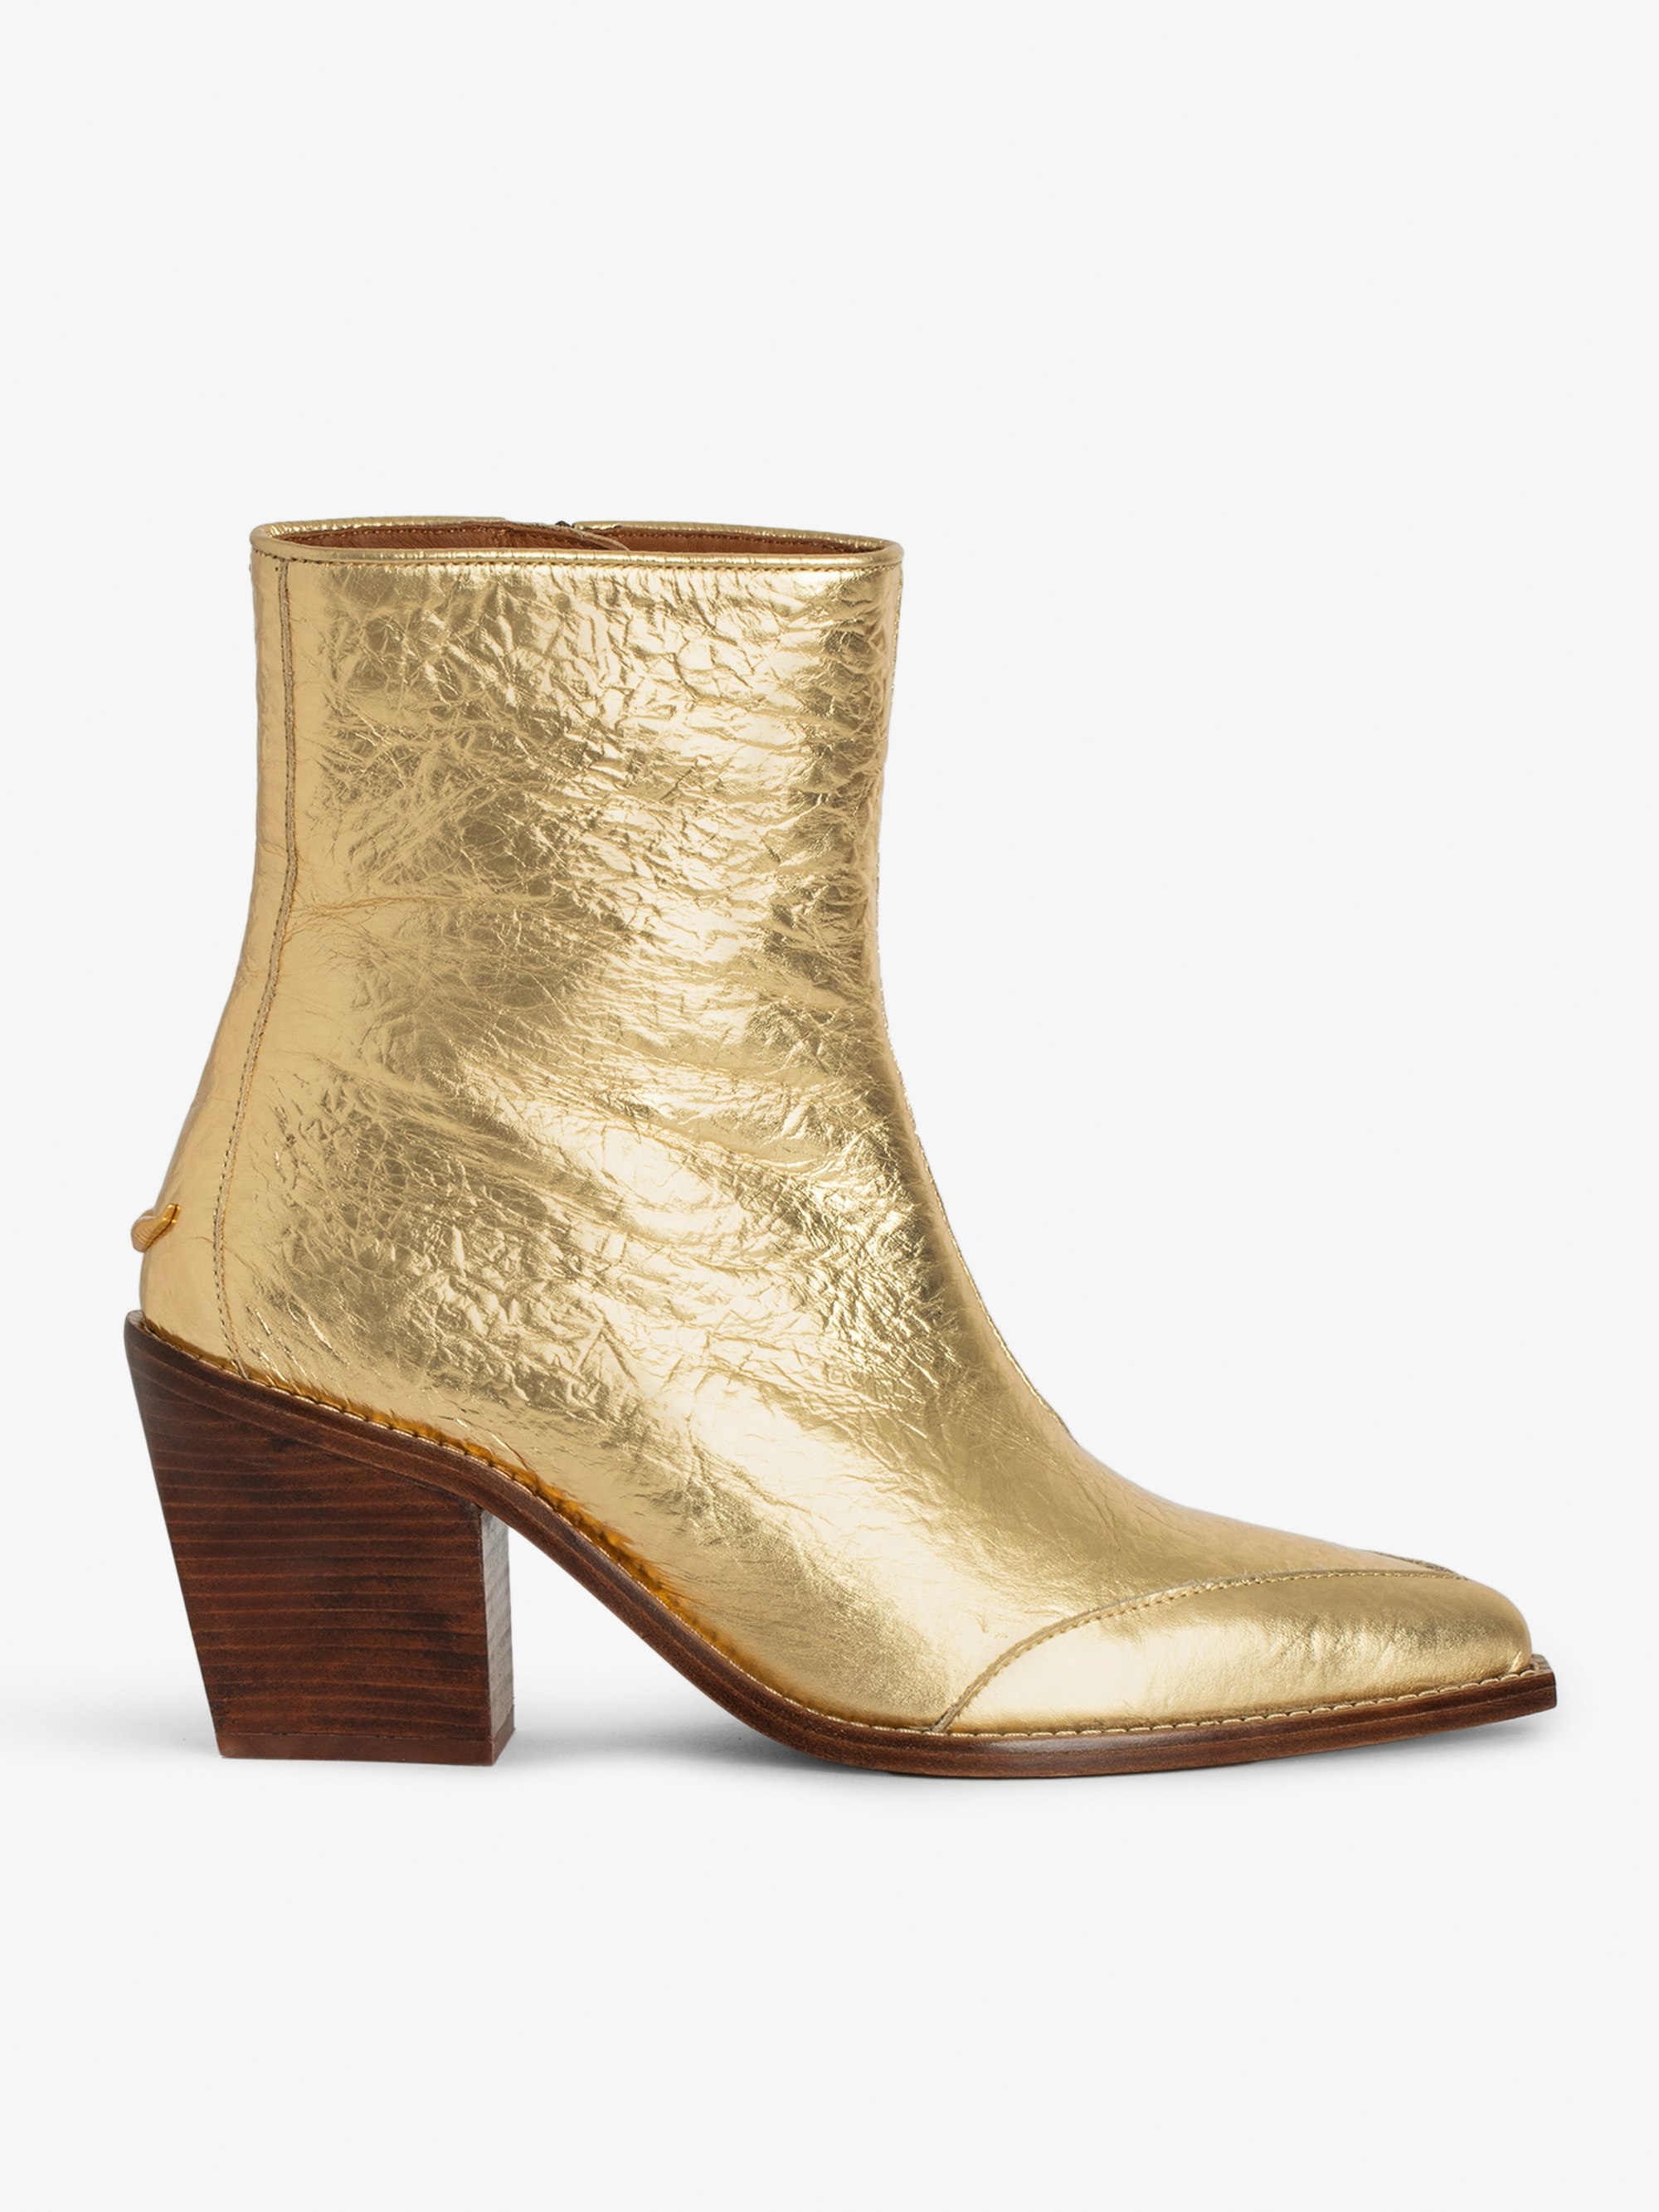 Cara Ankle Boots - Ankle boots in metallic gold leather with a crinkled effect and embellished with signature wings.